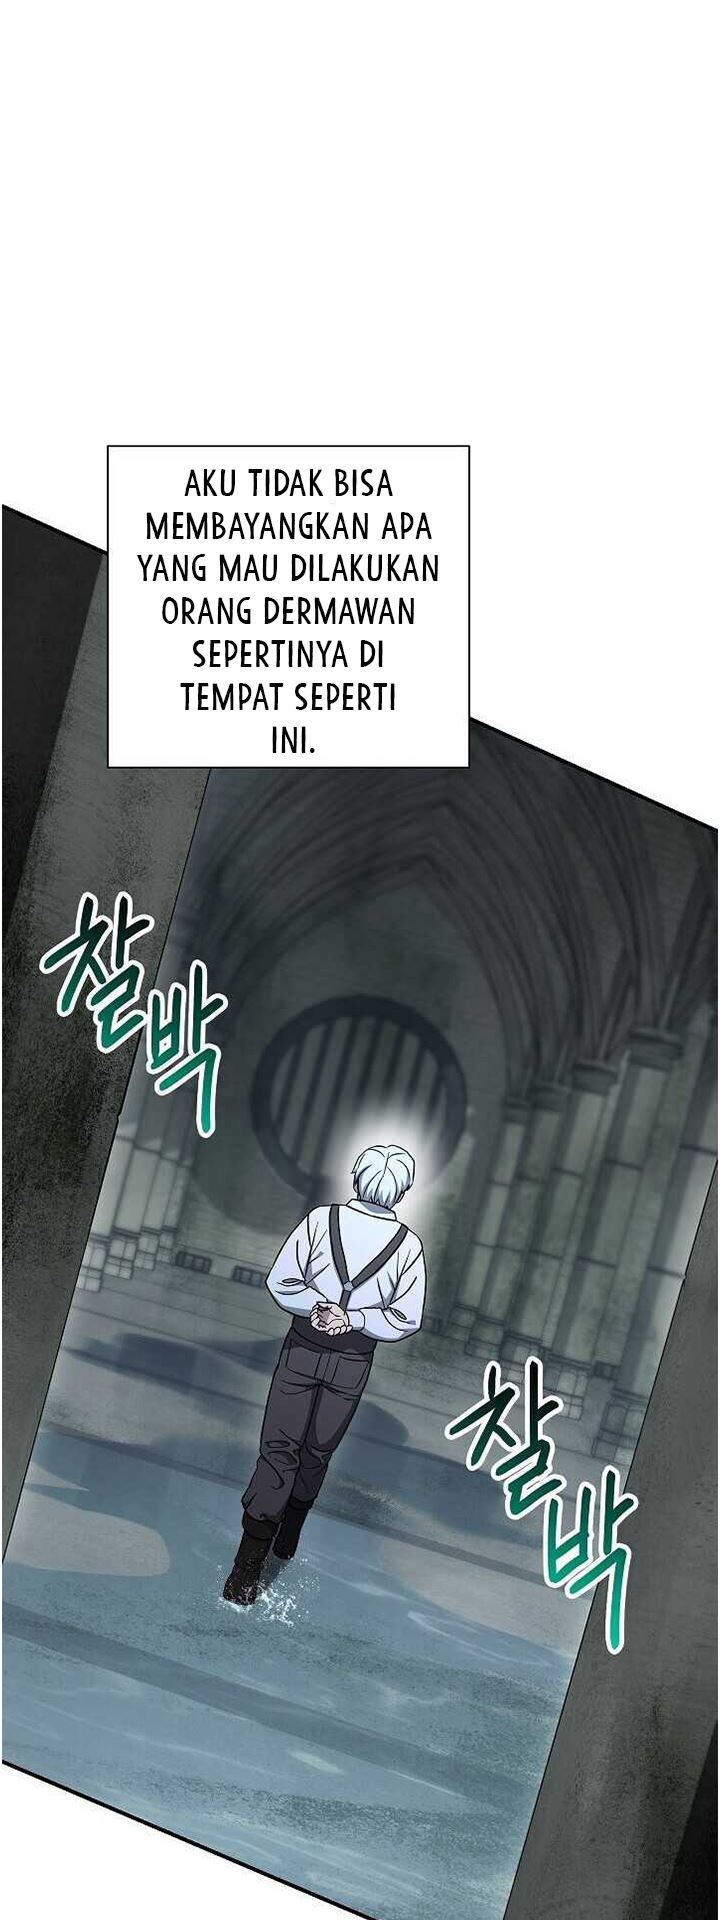 Skeleton Soldier Couldn’t Protect the Dungeon Chapter 146